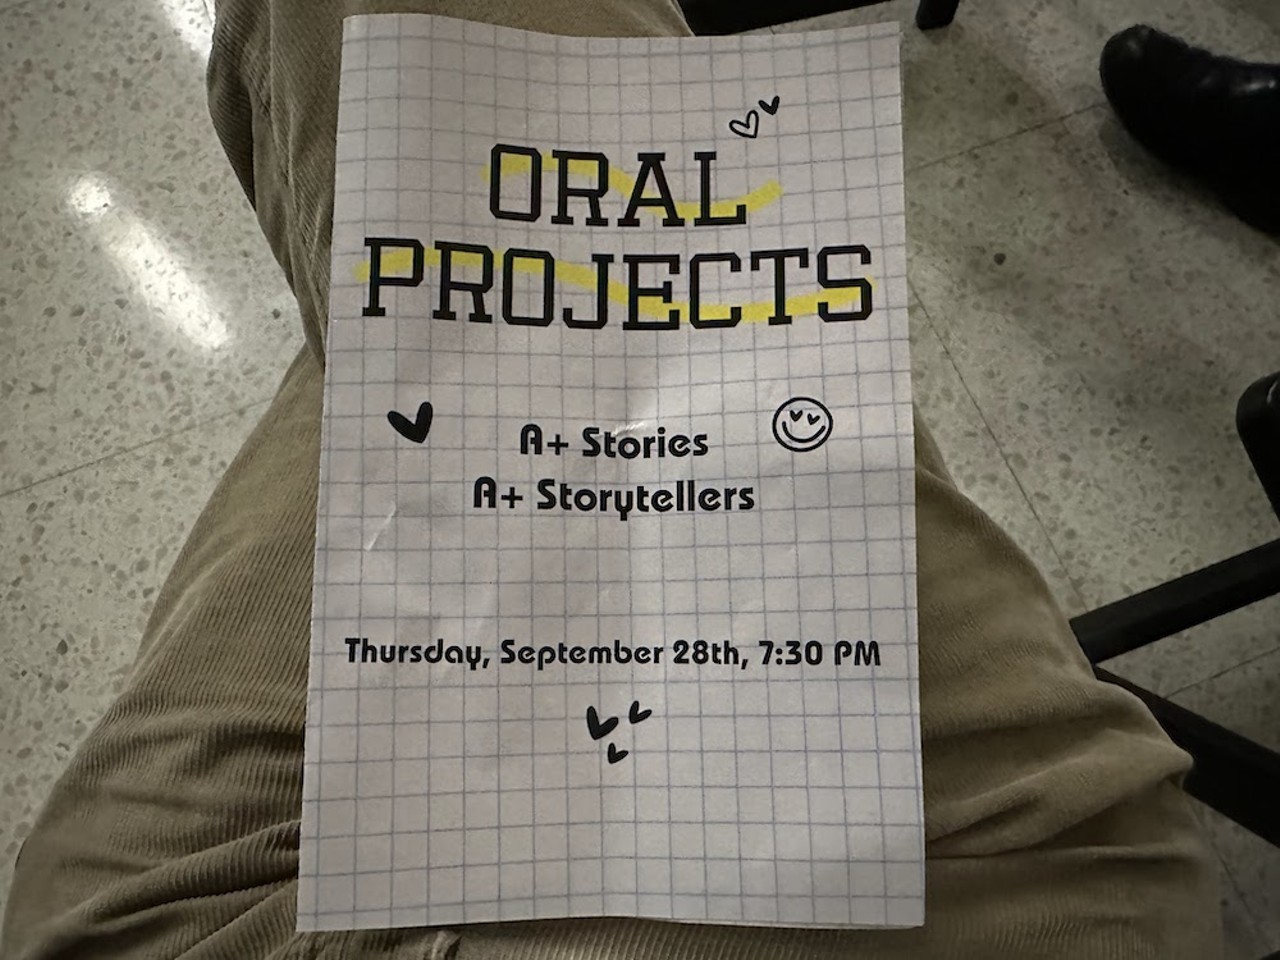 New spoken-word series Oral Project seeks to attract long-form storytellers to Orlando